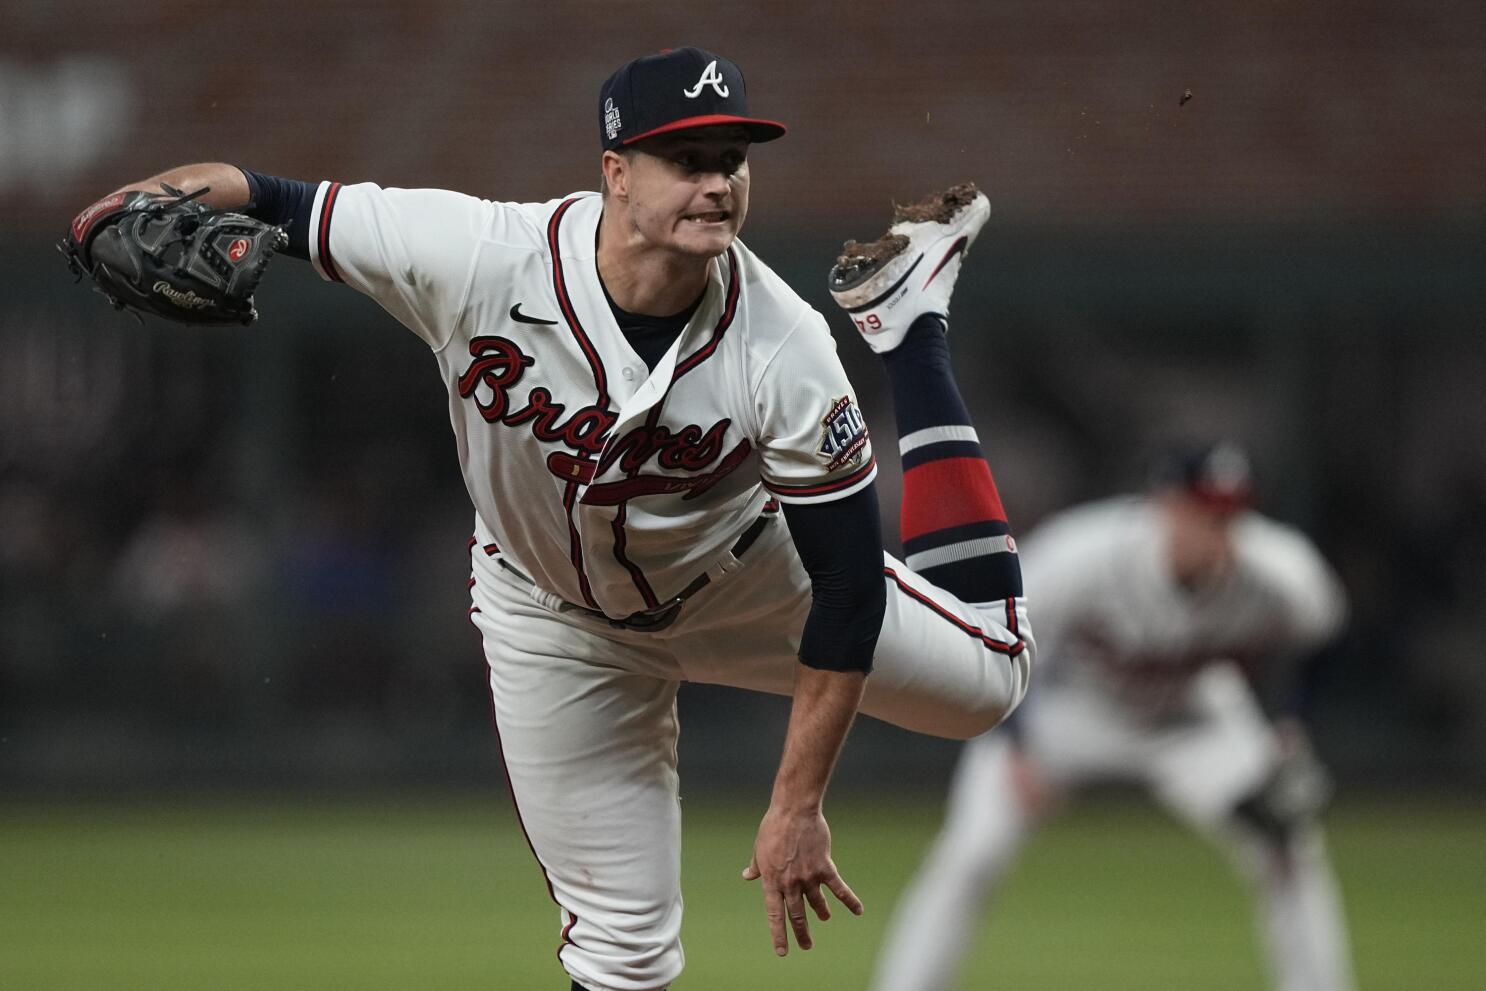 Braves pitcher Dylan Lee far removed from World Series spotlight